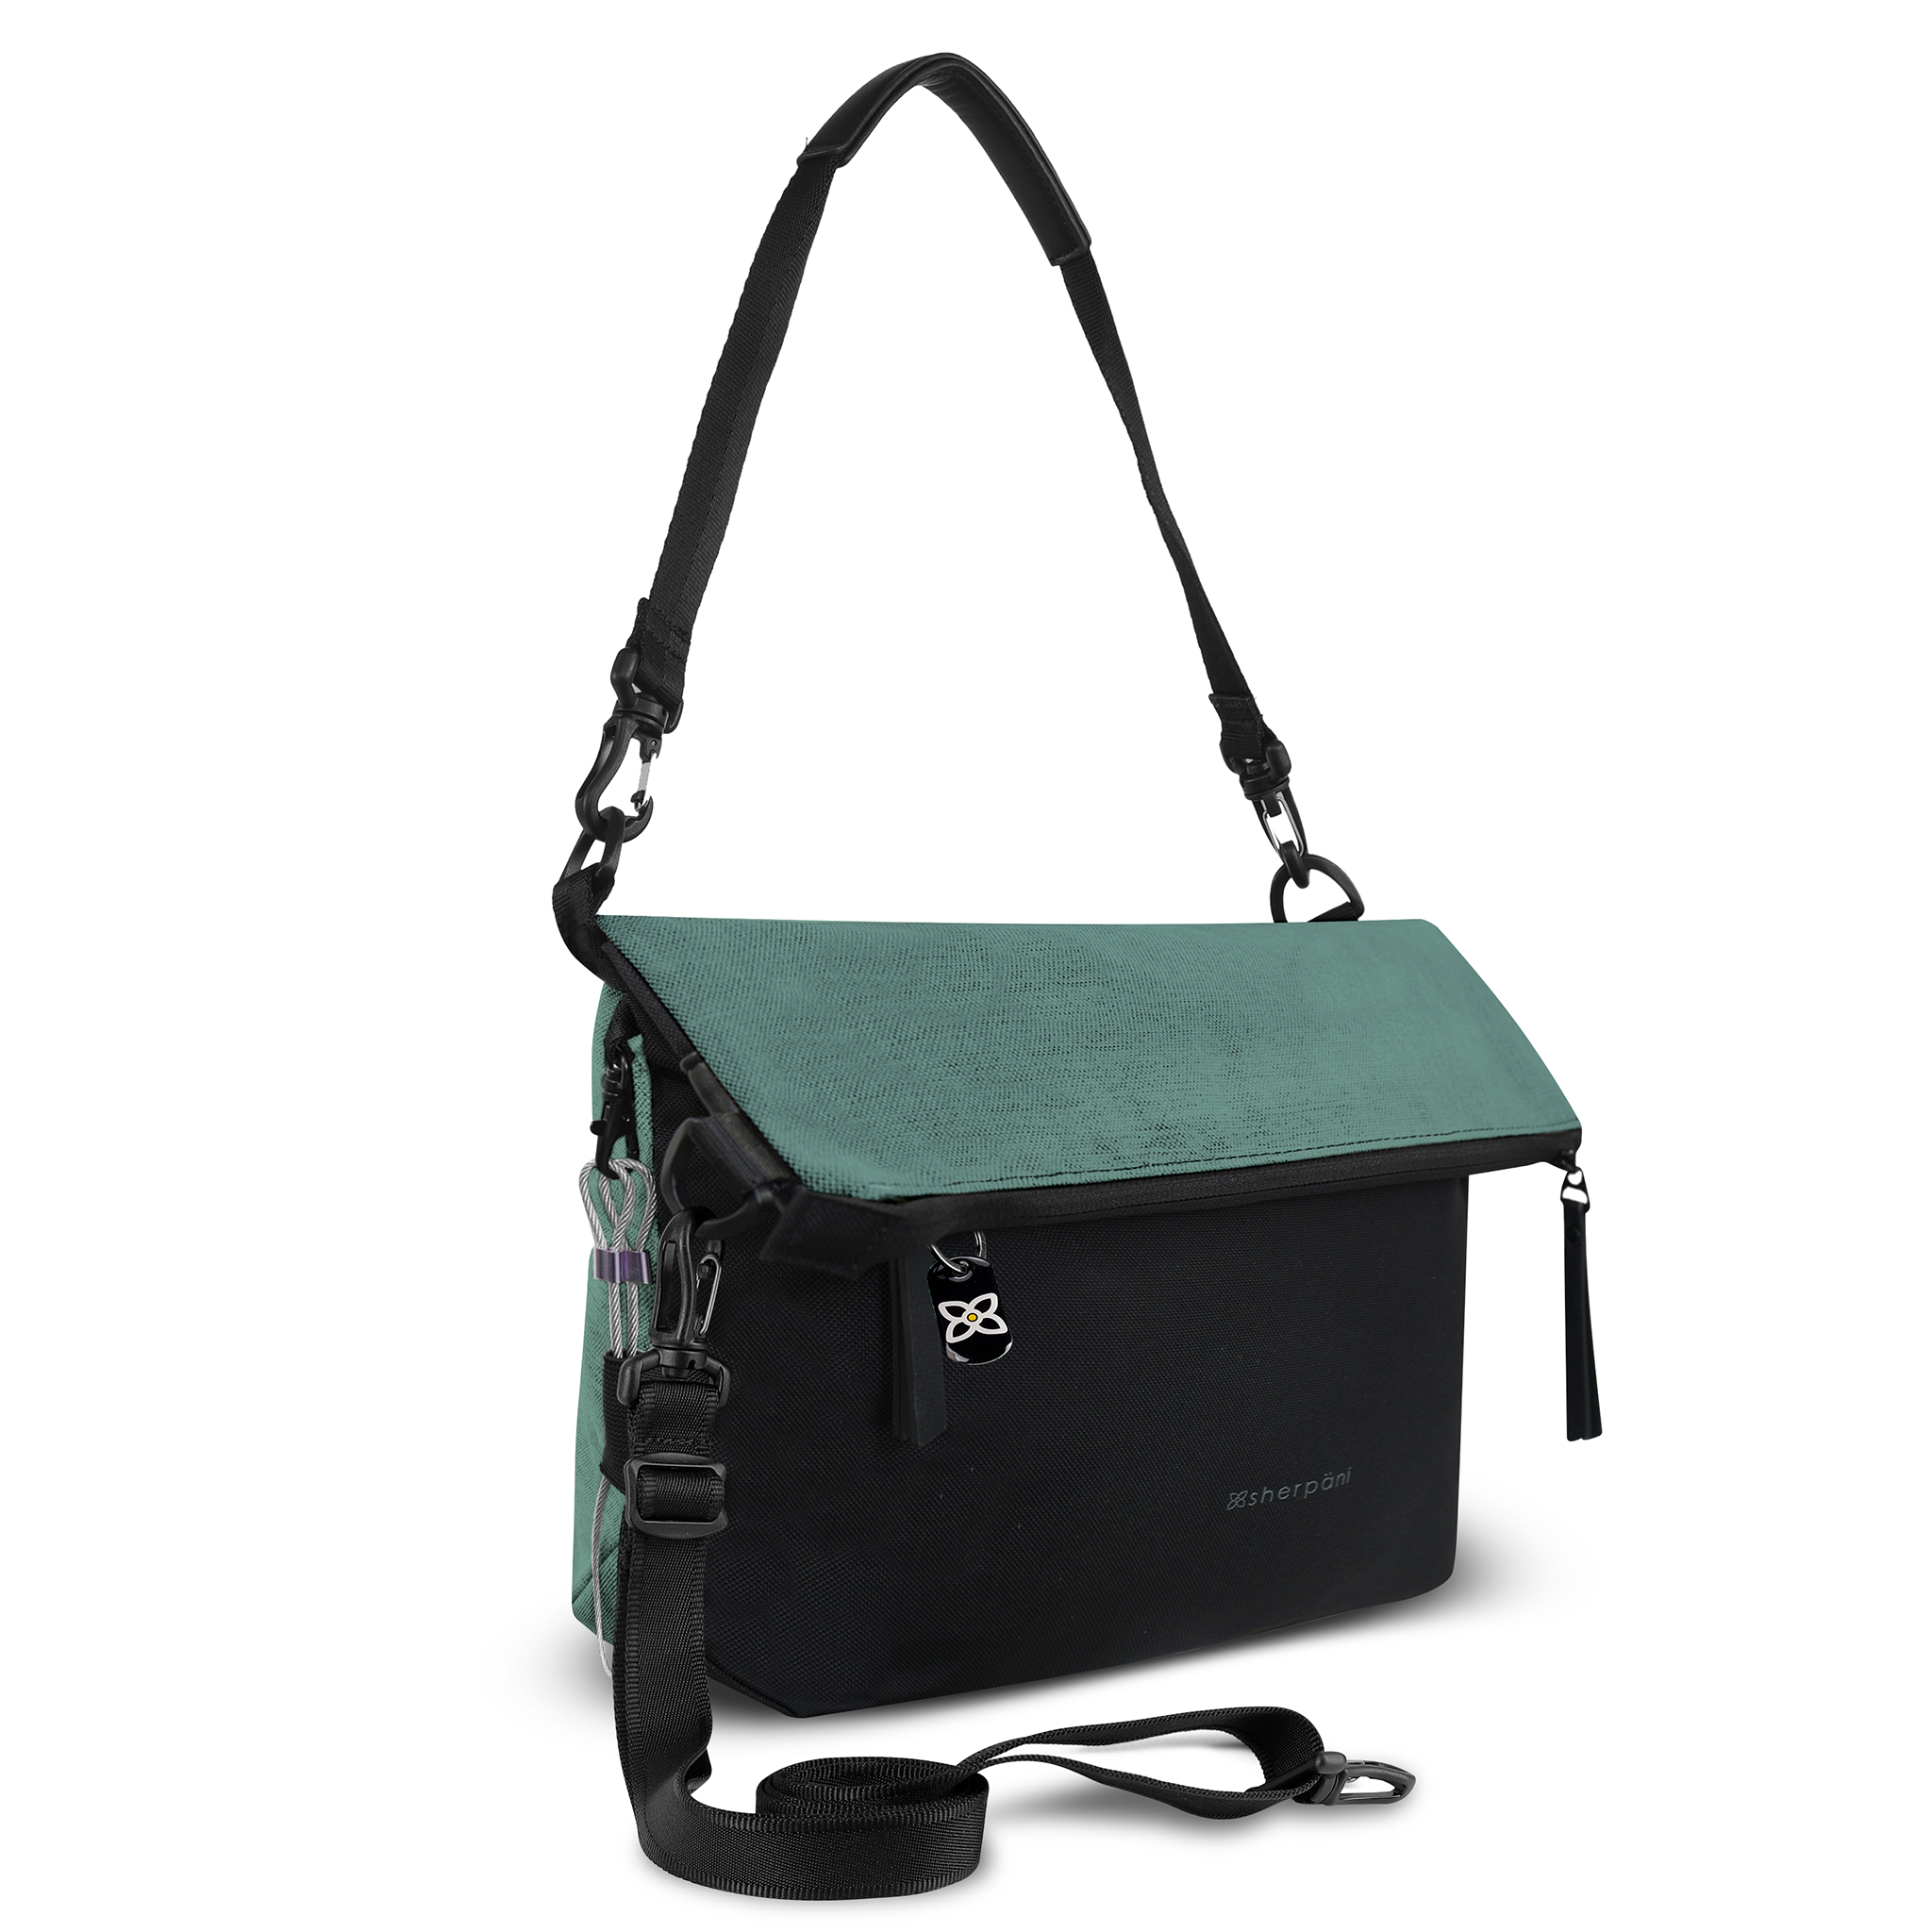 Angled front view of Sherpani&#39;s Anti-Theft bag, the Vale AT in Teal, with vegan leather accents in black. The top is folded over creating a signature overlap look. A chair loop lock is connected to a key fob clip on one side. It has an adjustable/detachable crossbody strap, and a second detachable strap fixed at a shorter length.